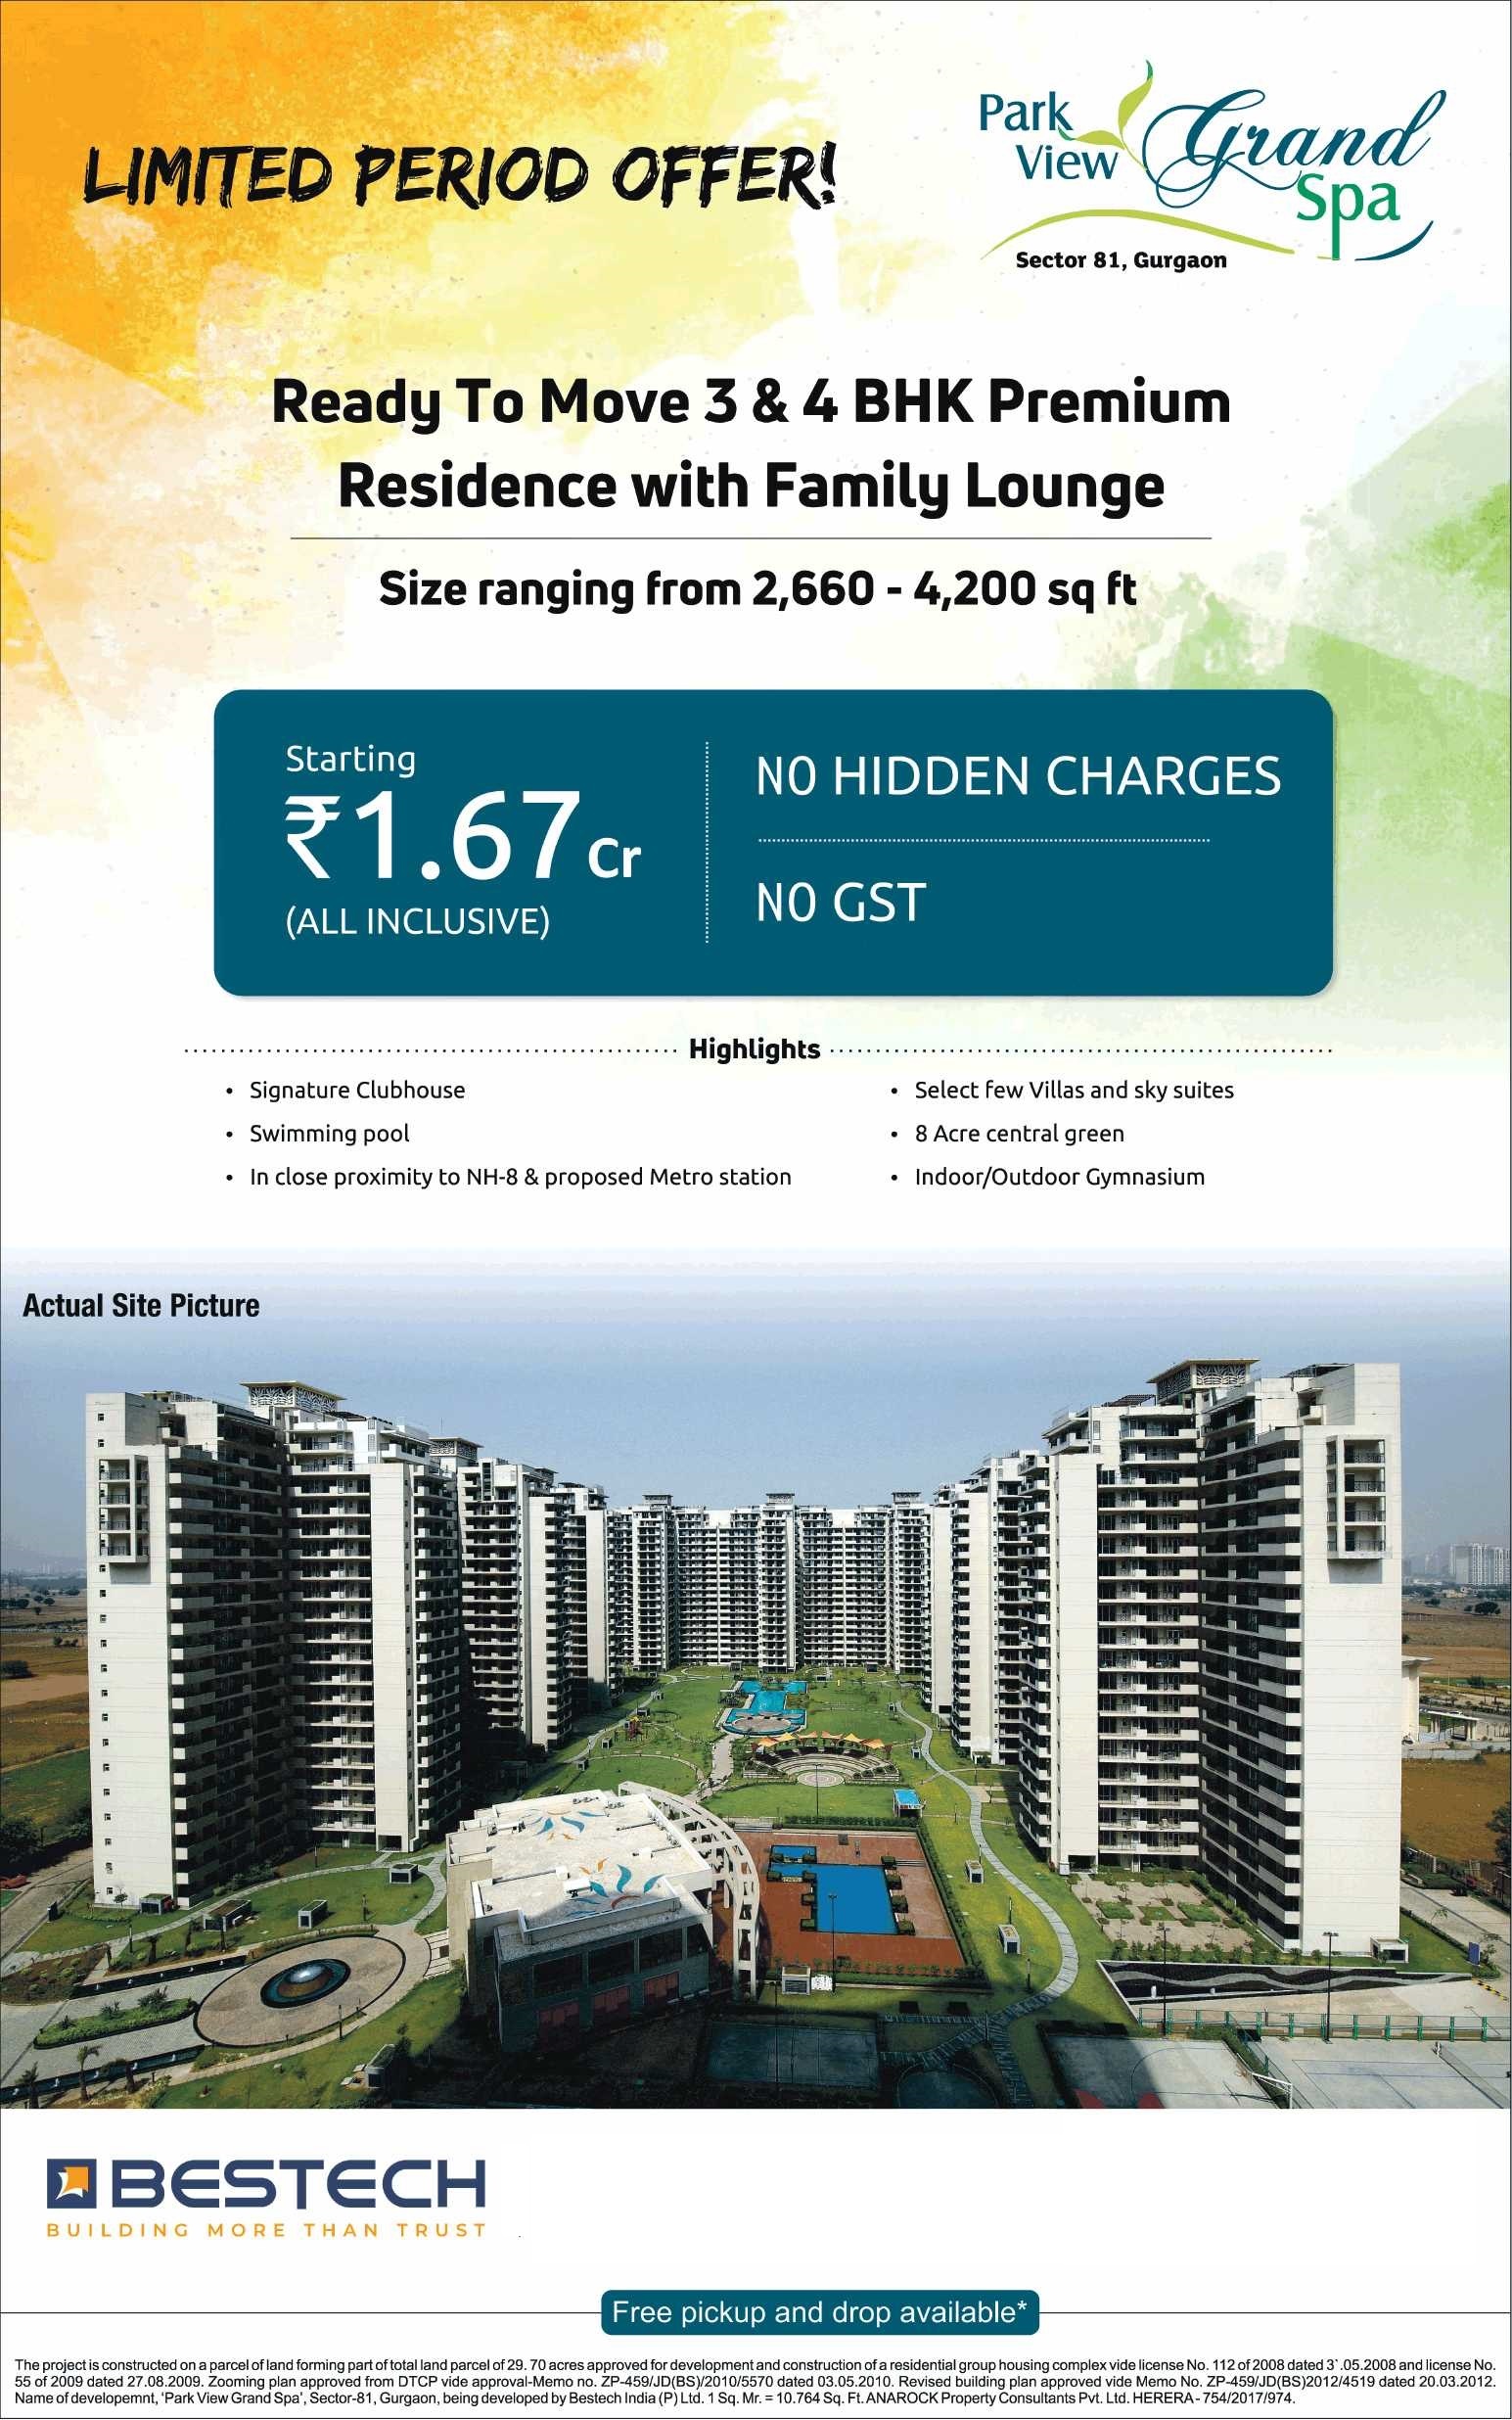 Ready to move 3 & 4 bhk premium residencies at Bestech Park View Grand Spa in Gurgaon